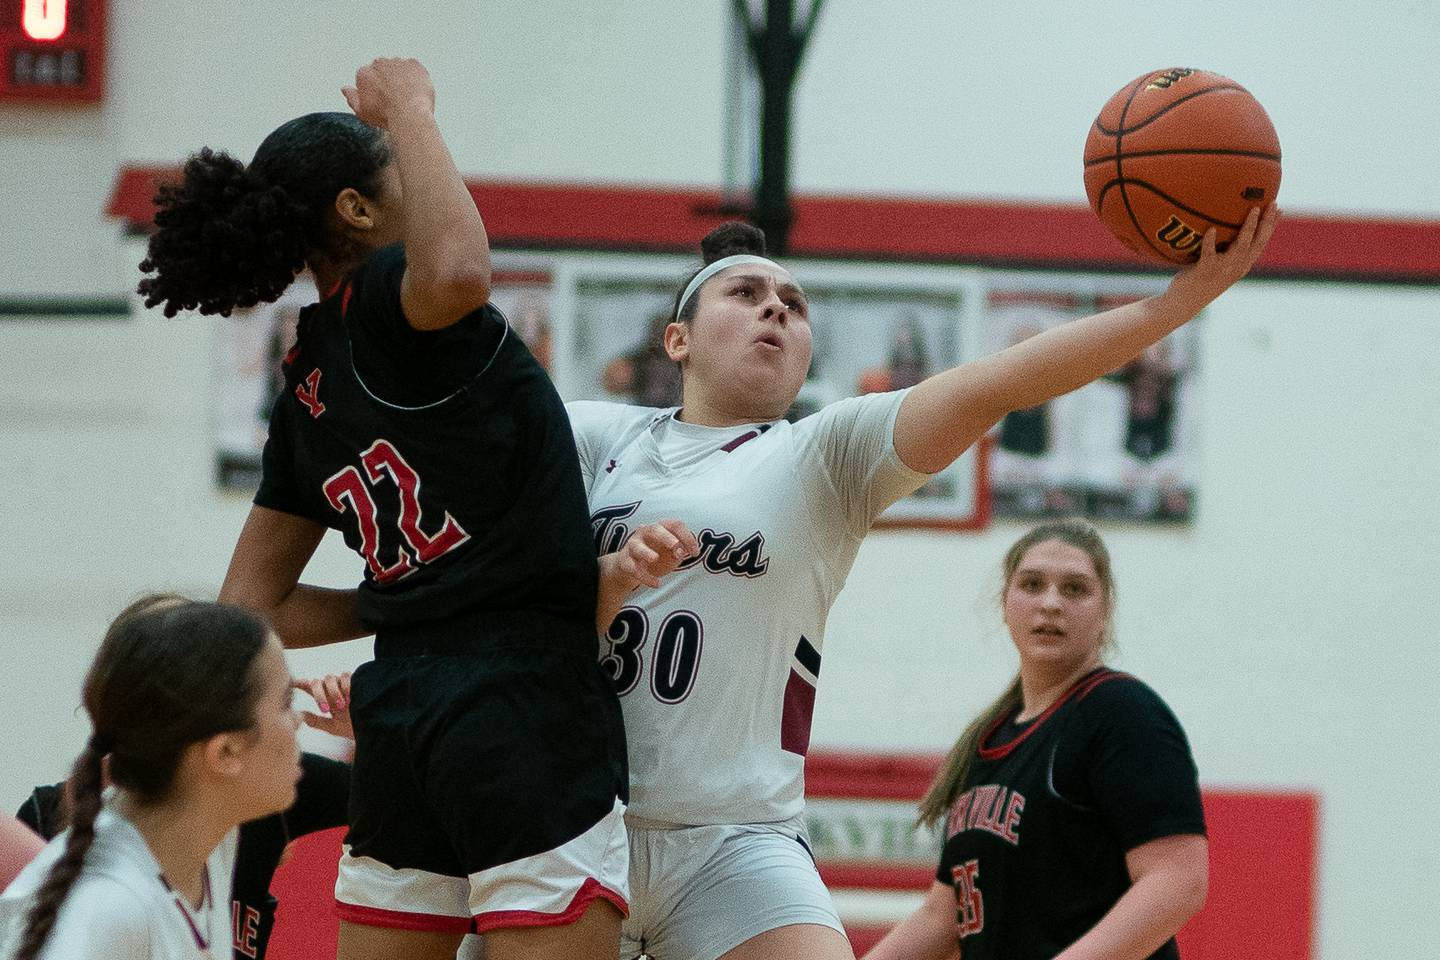 Plainfield North's Lexi Salazar (30) shoots the ball against Yorkville's Alexandra Stewart (22) during a Yorkville girls 4A regional semifinal basketball game at Yorkville High School on Tuesday, Feb 14, 2023.